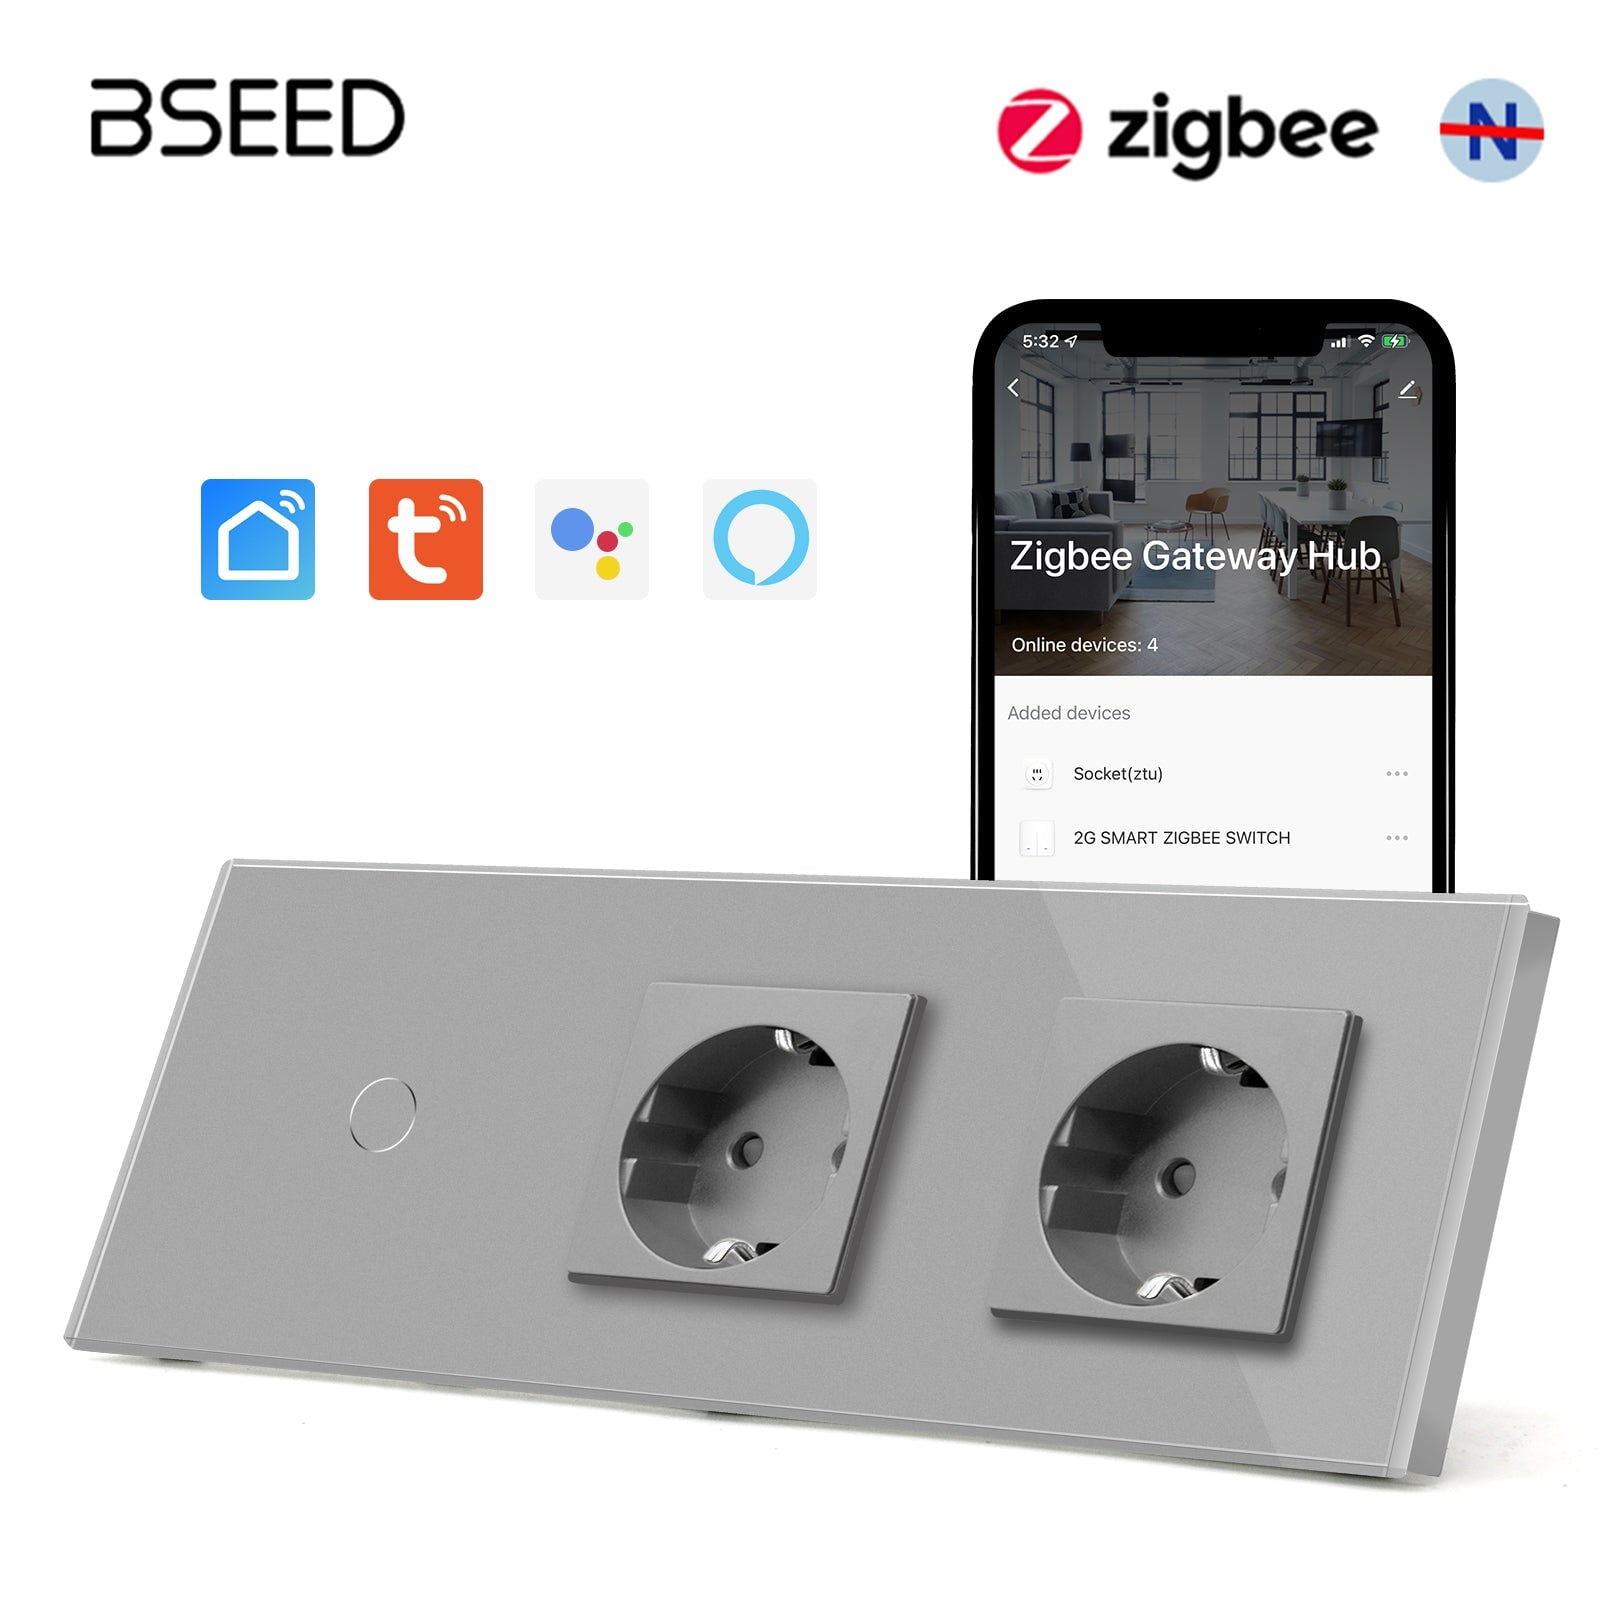 Bseed Zigbee Touch 1/2/3 Gang Light Switches Single Live Line Multi Control With Double EU Standard Not Smart Wall Sockets Light Switches Bseedswitch Grey 1Gang 